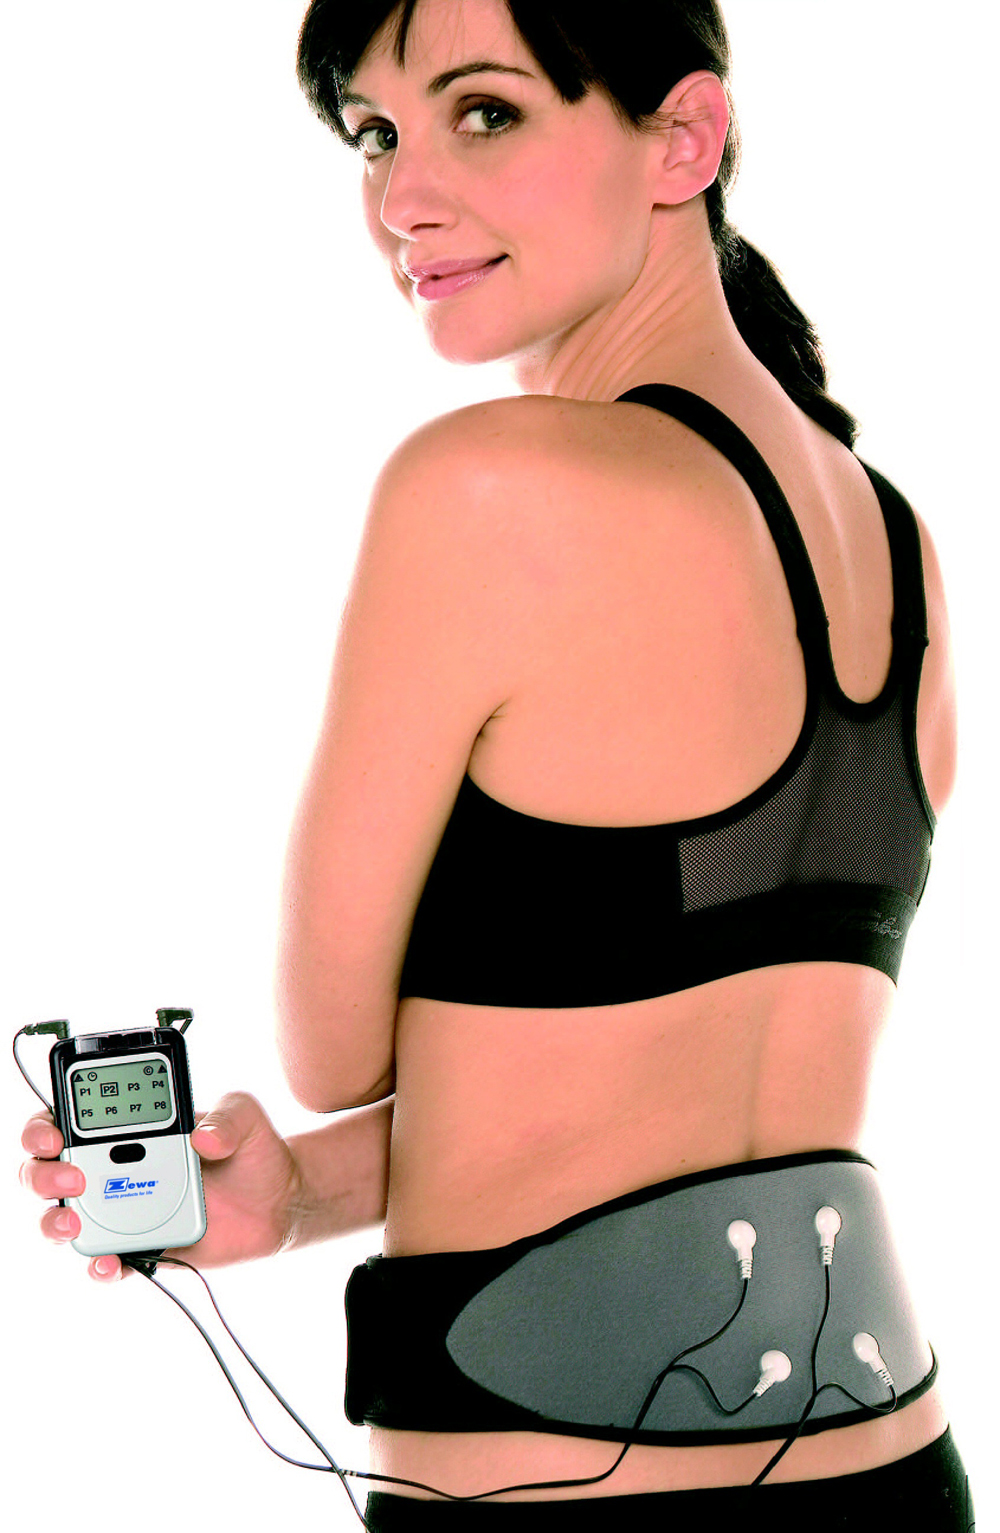 https://www.toolsforwellness.com/wp-content/uploads/2022/10/personal-electronic-massager-designed-for-back-pain-6.jpg